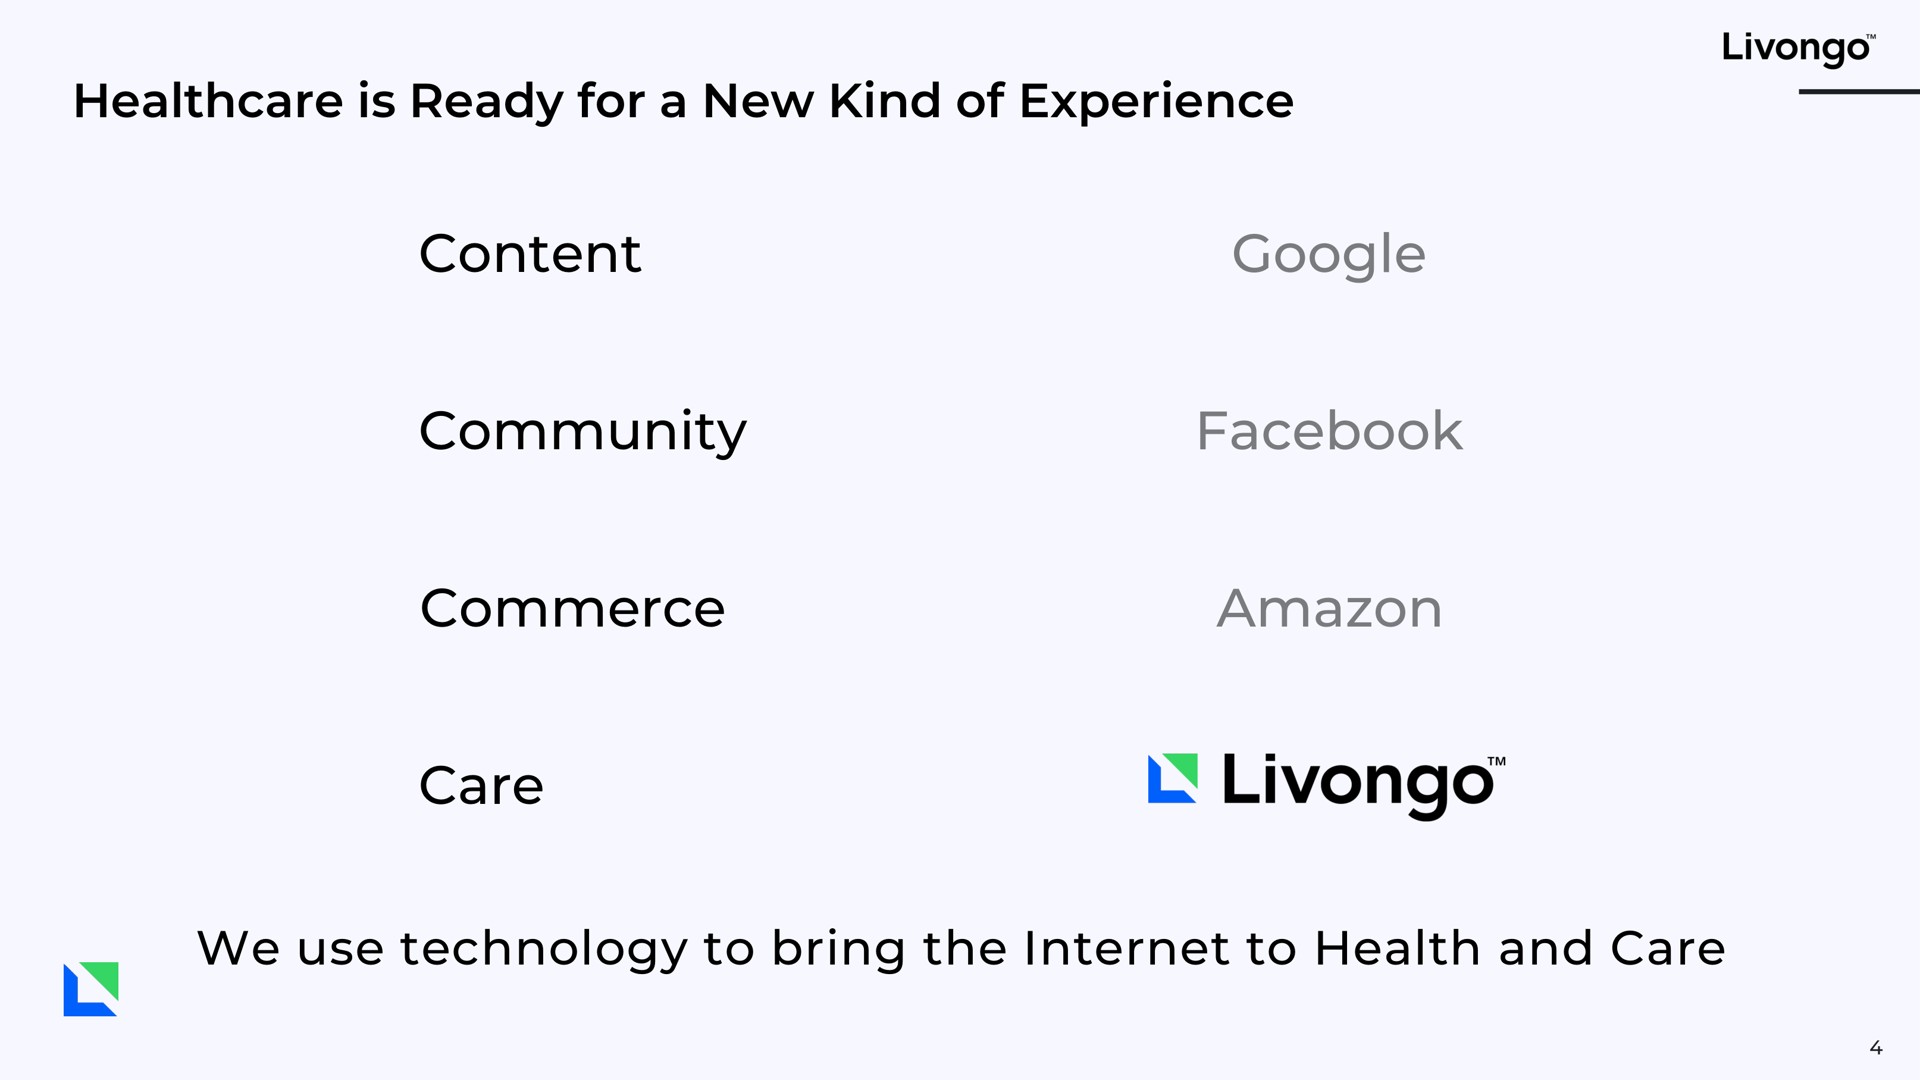 is ready for a new kind of experience content community commerce care we use technology to bring the to health and care | Livongo